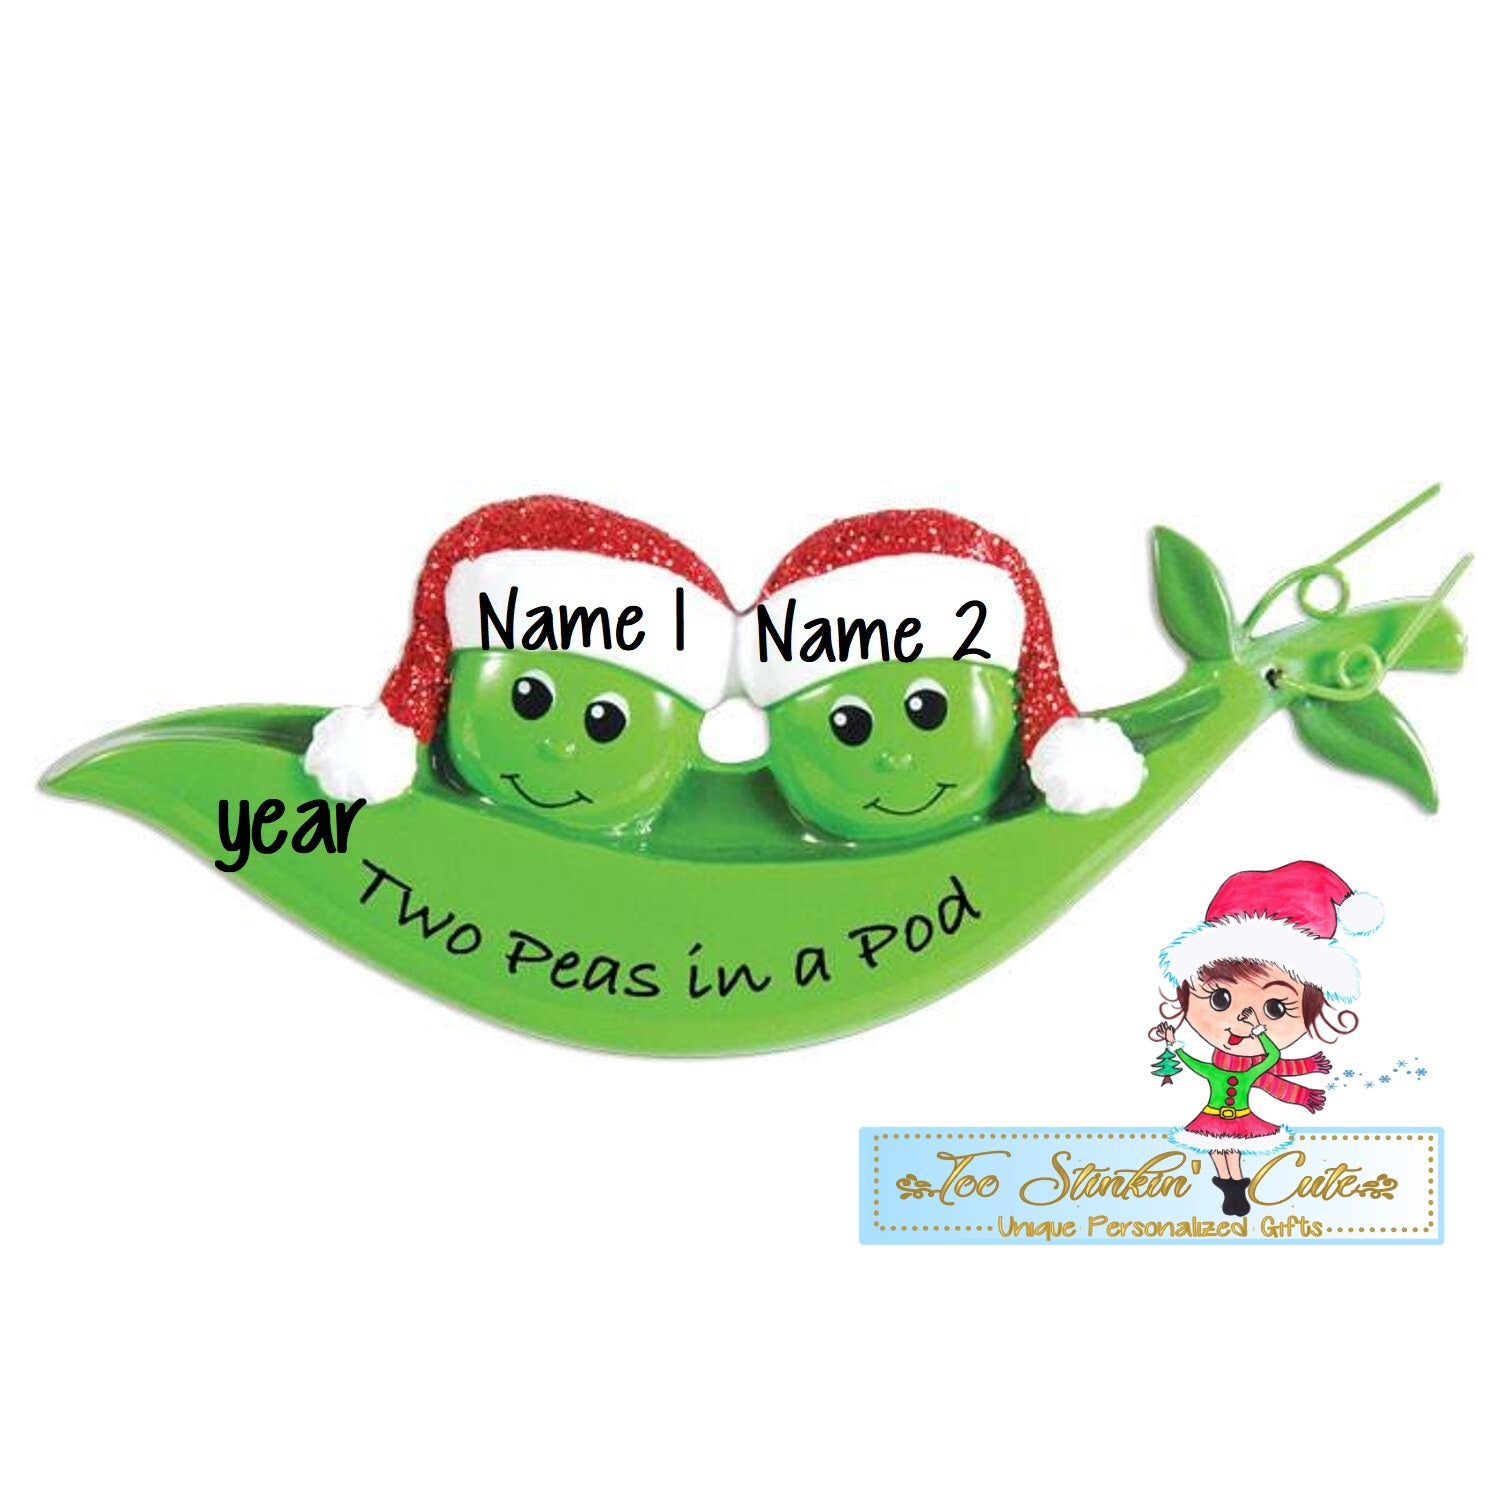 Pea Pod Family of 2/ Two Peas in a Pod! Personalized Christmas Ornament